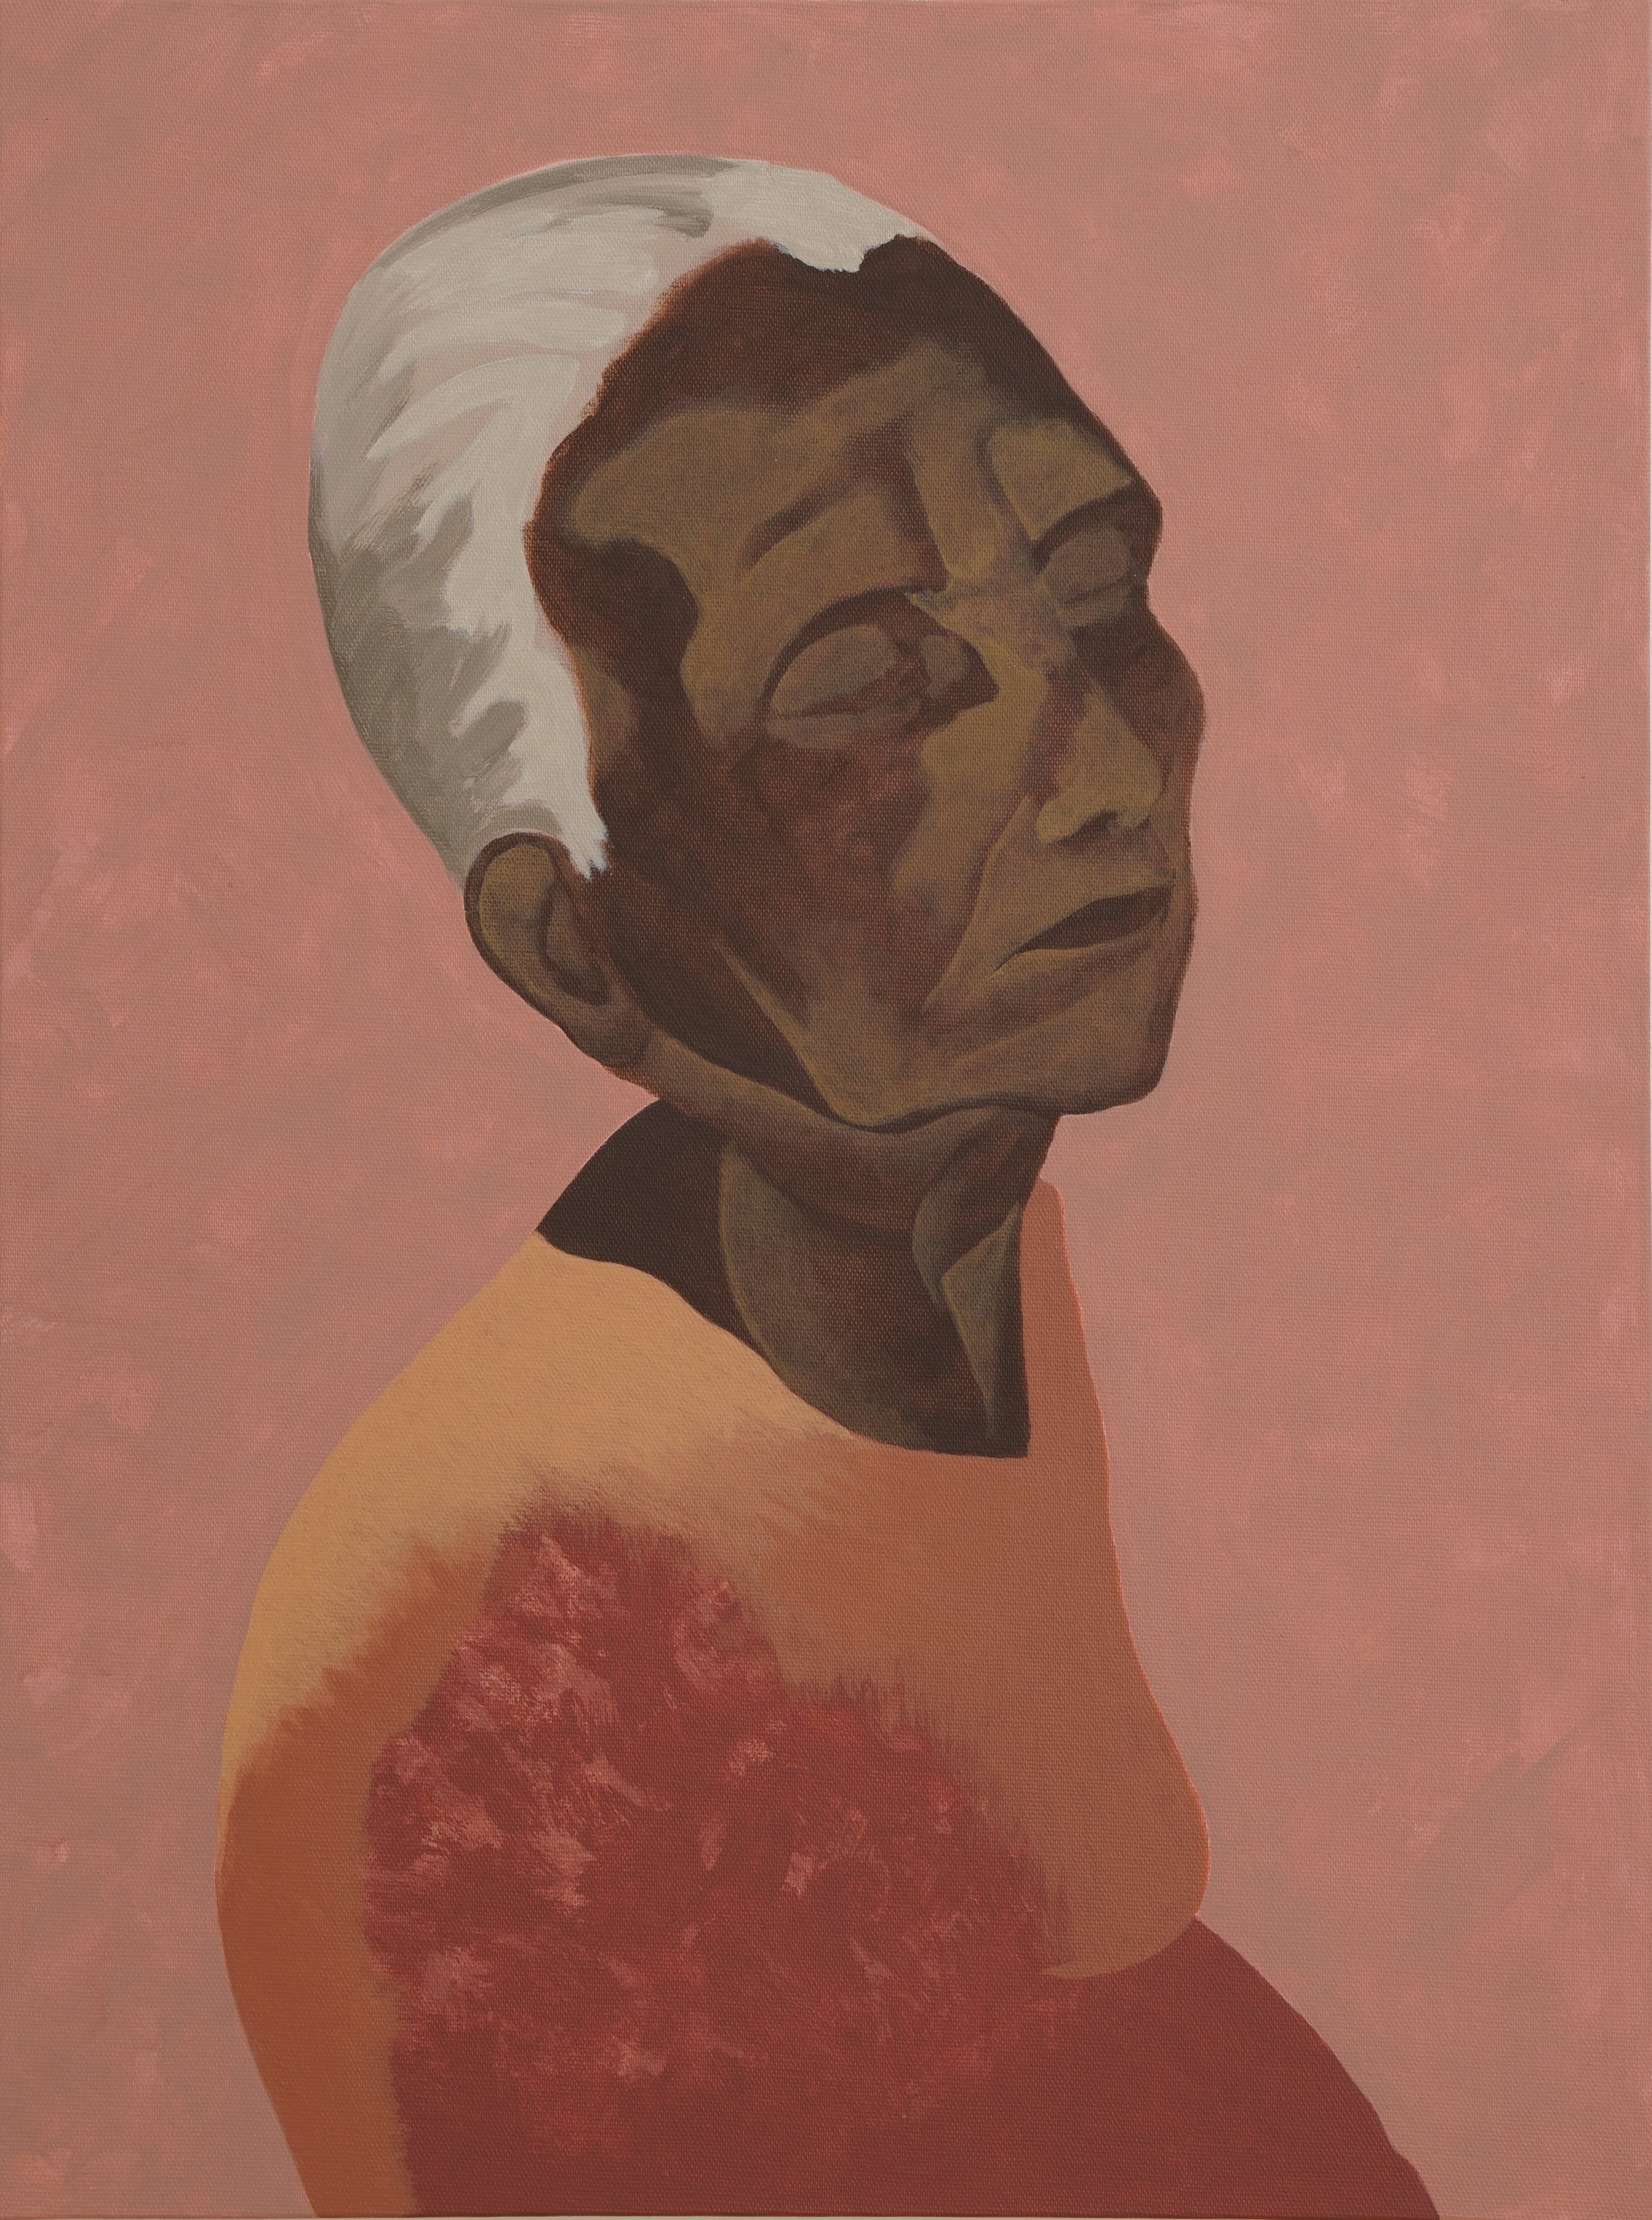 GIEVE PATEL

Mary, my patient, 2020

Acrylic on canvas

24 x 18 in / 60.9 x 45.7 cm